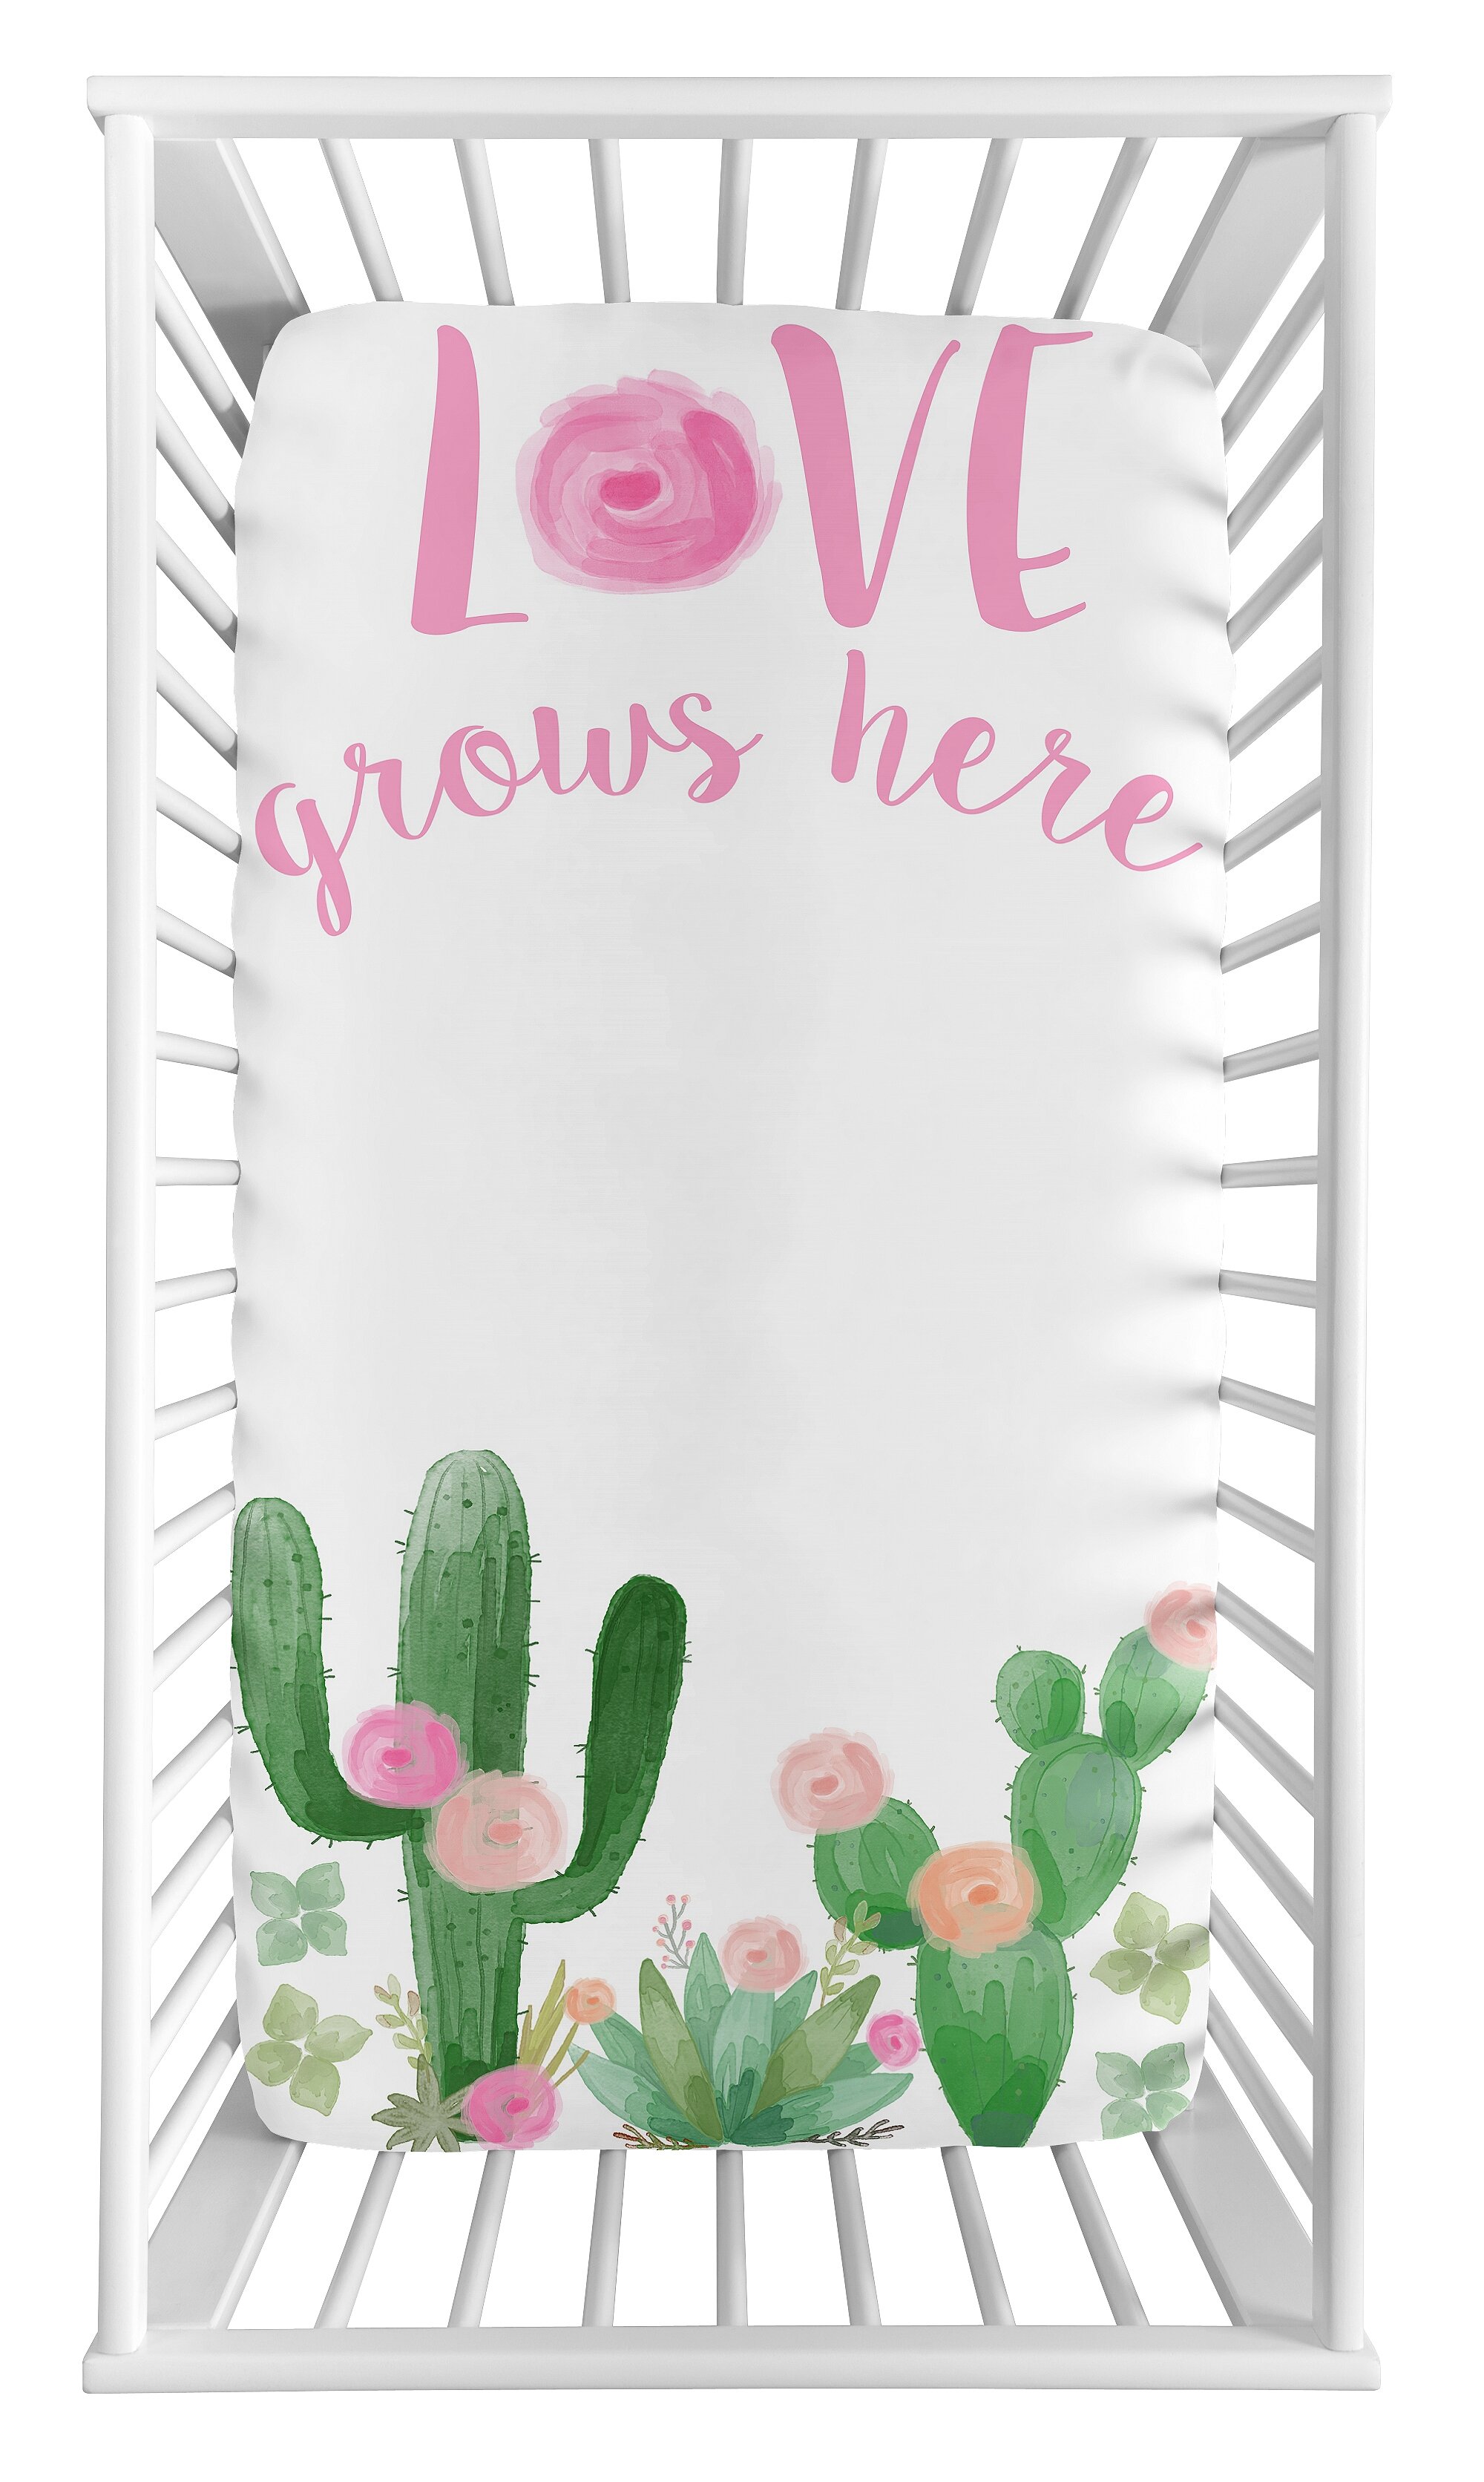 cactus fitted crib sheet